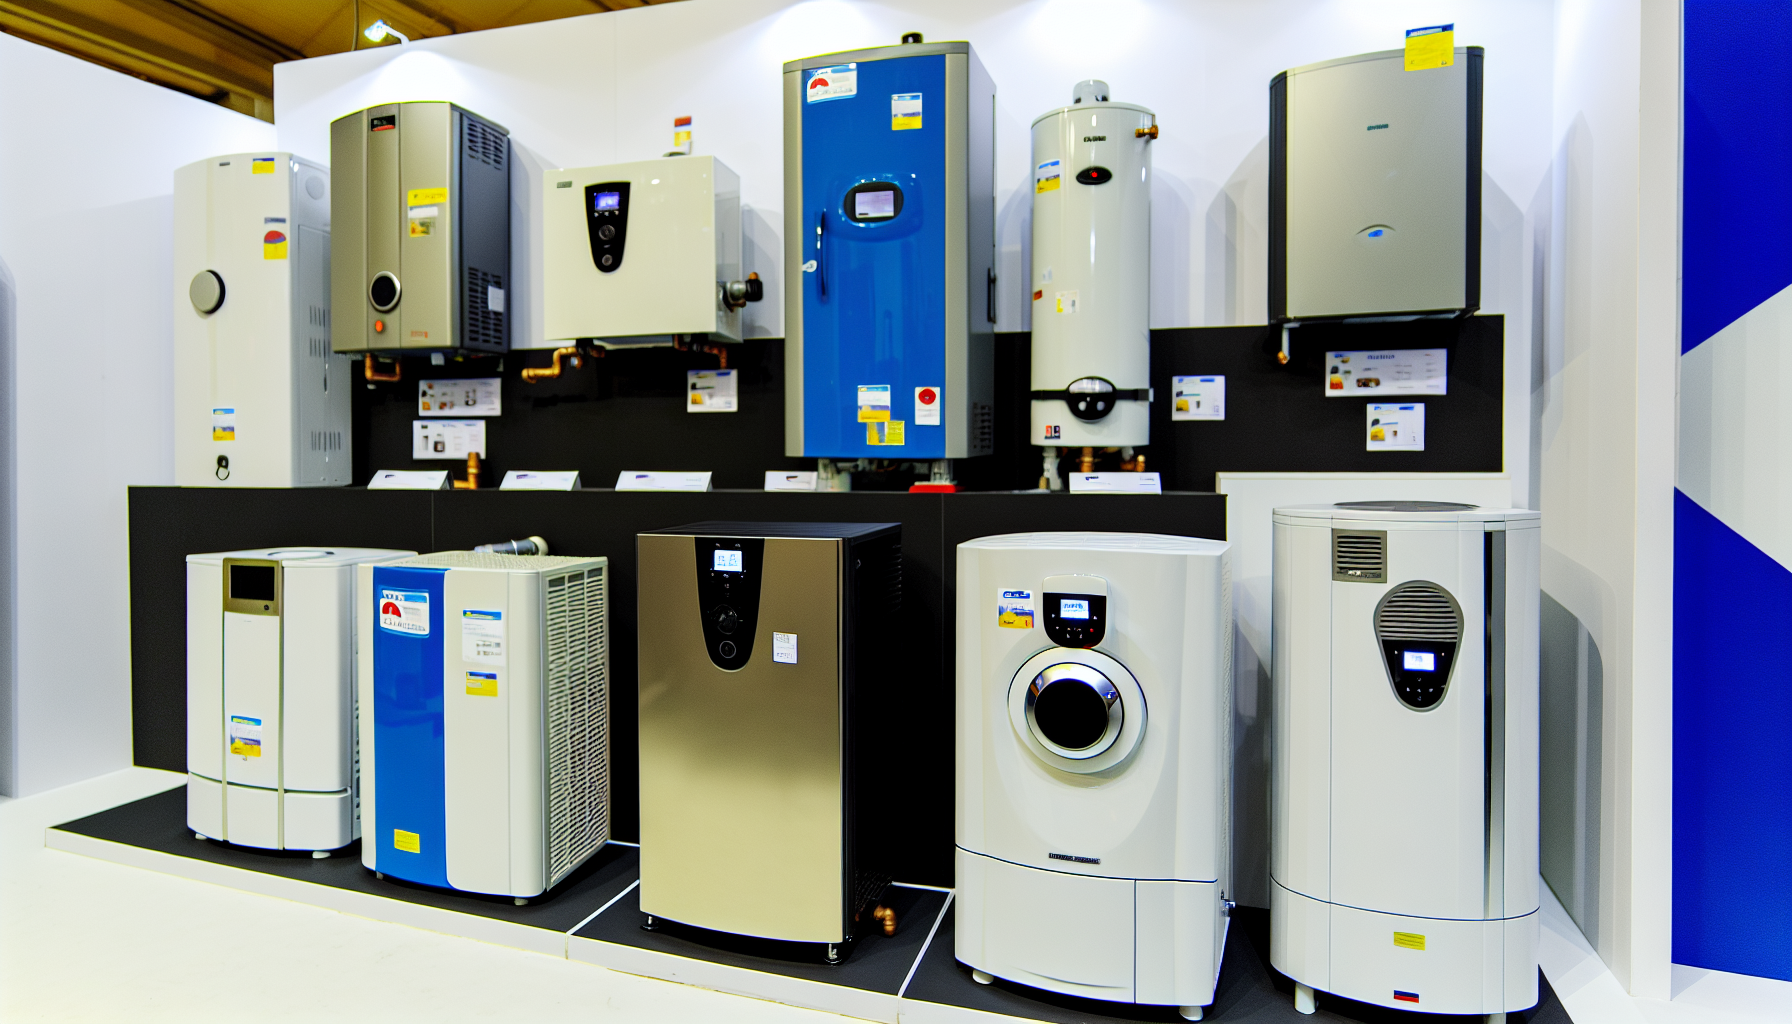 Choosing the right heat pump hot water system